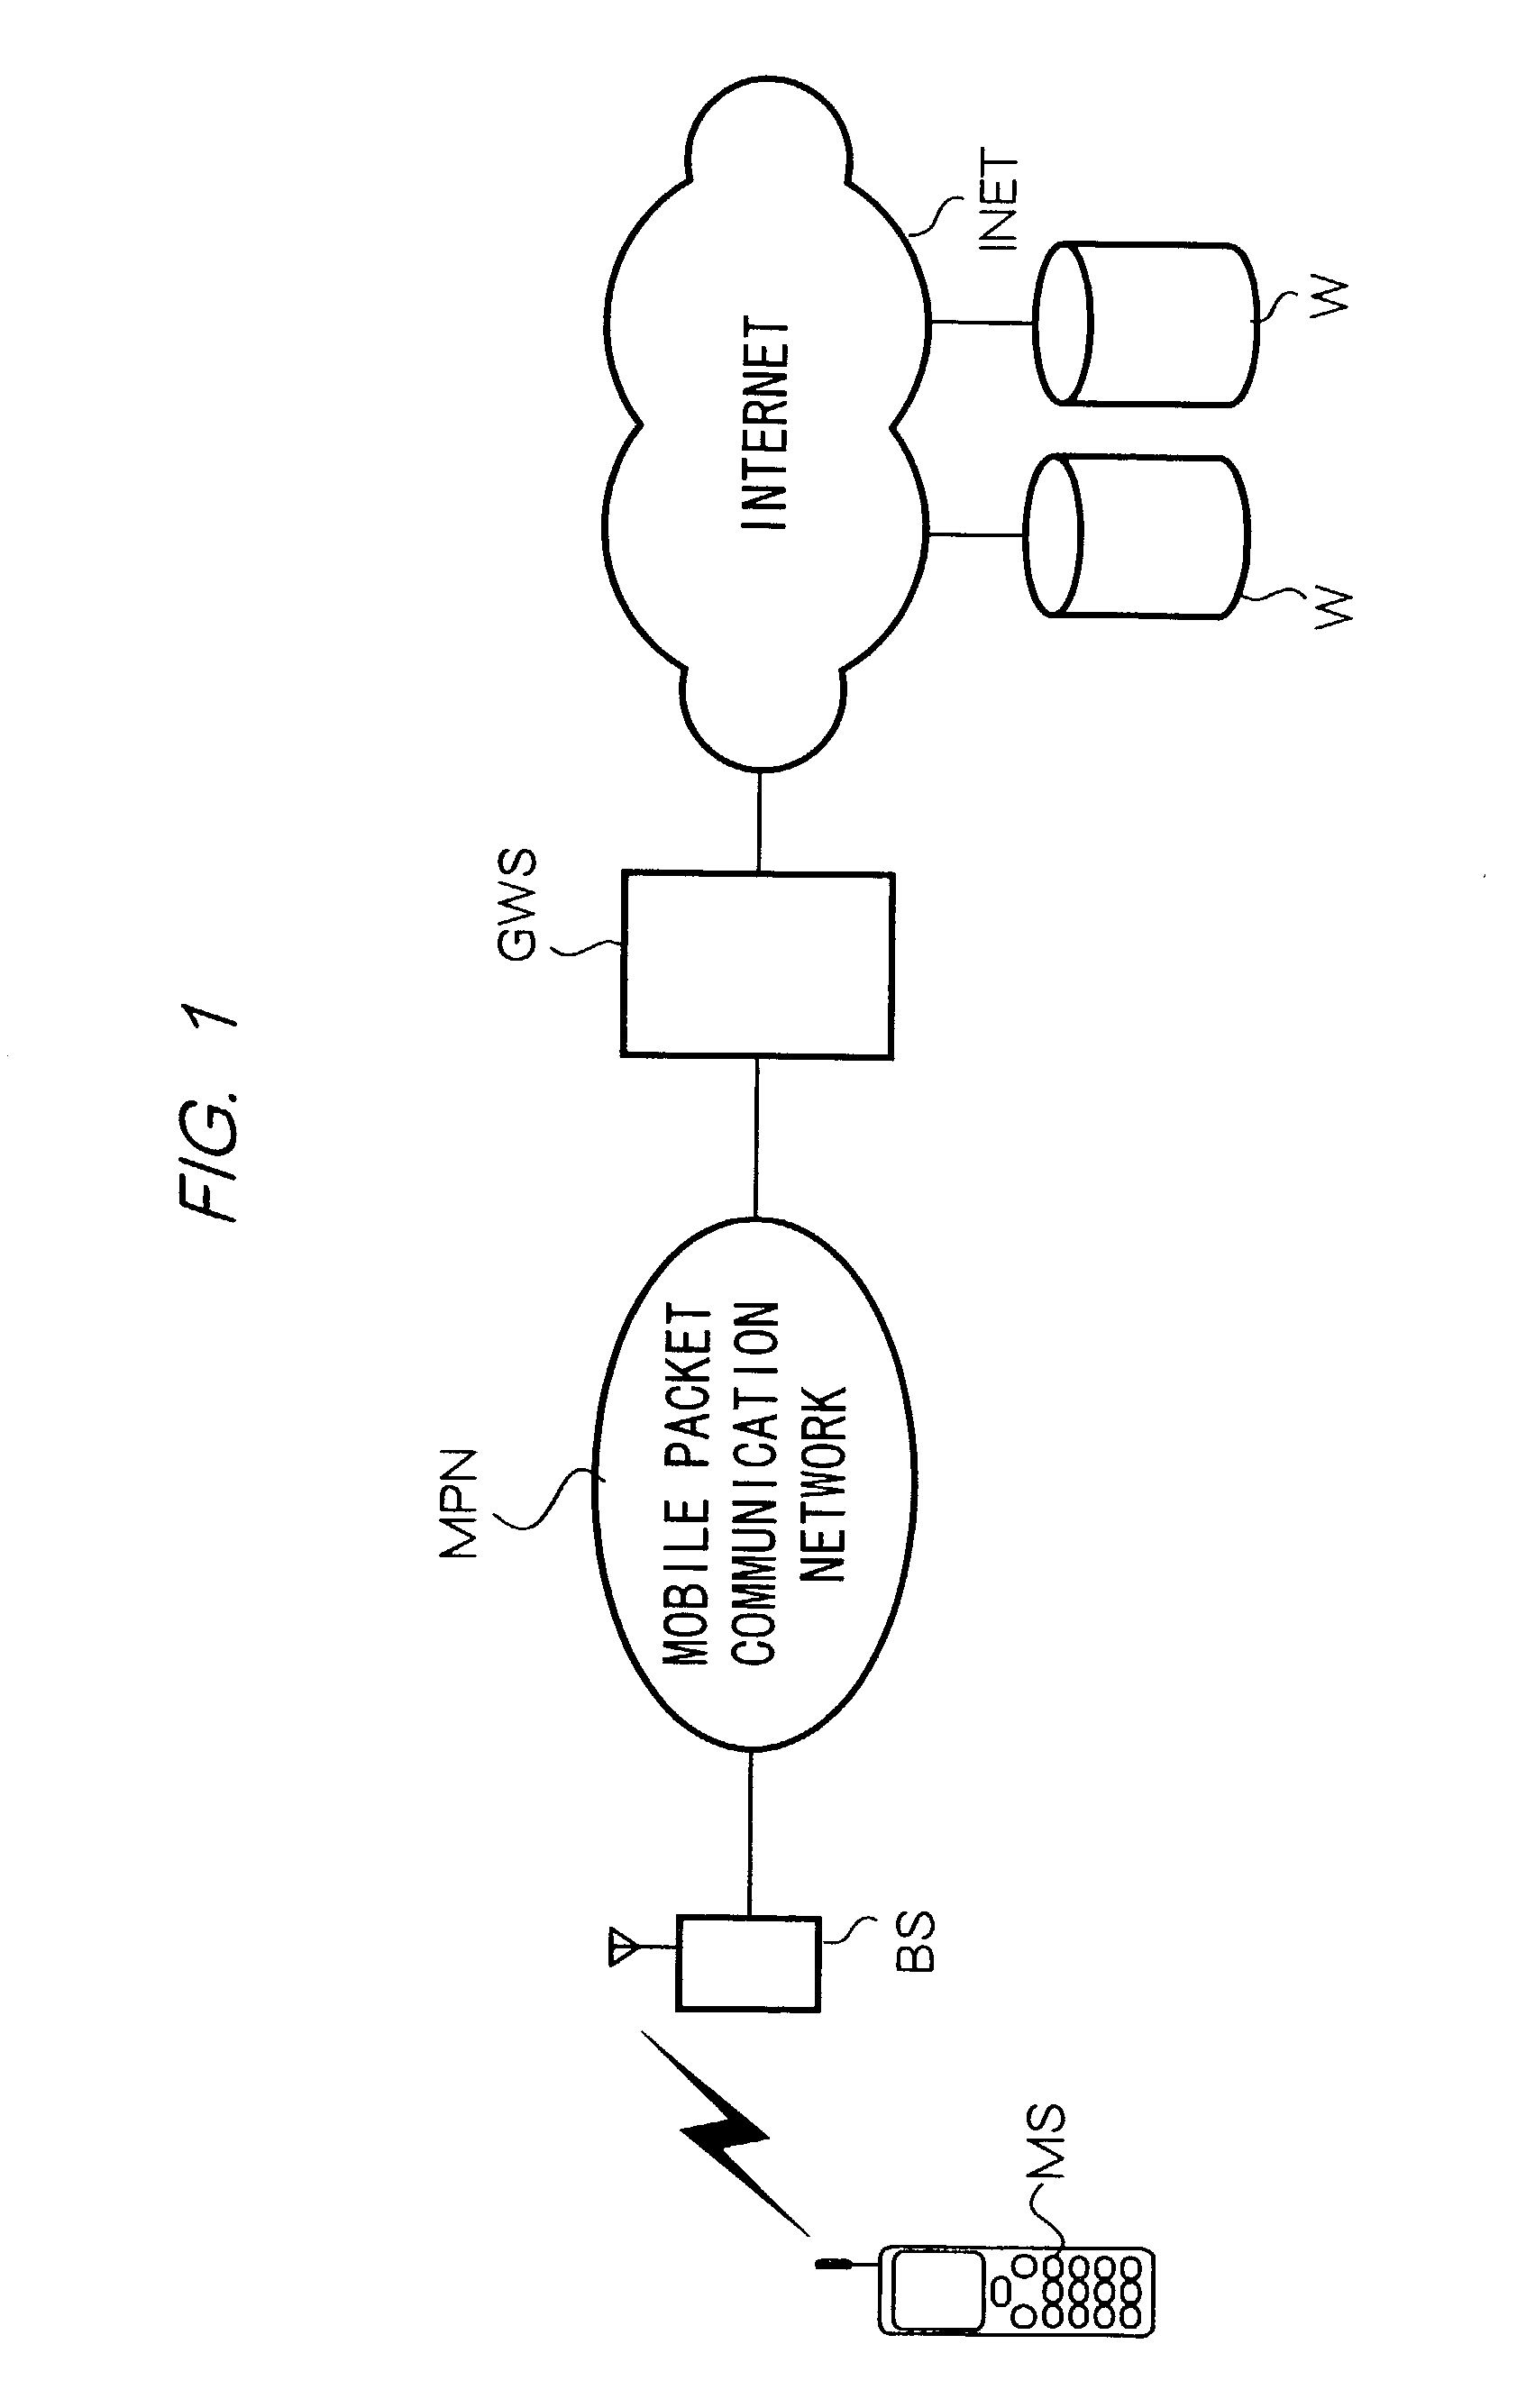 Receiving device and repeating device